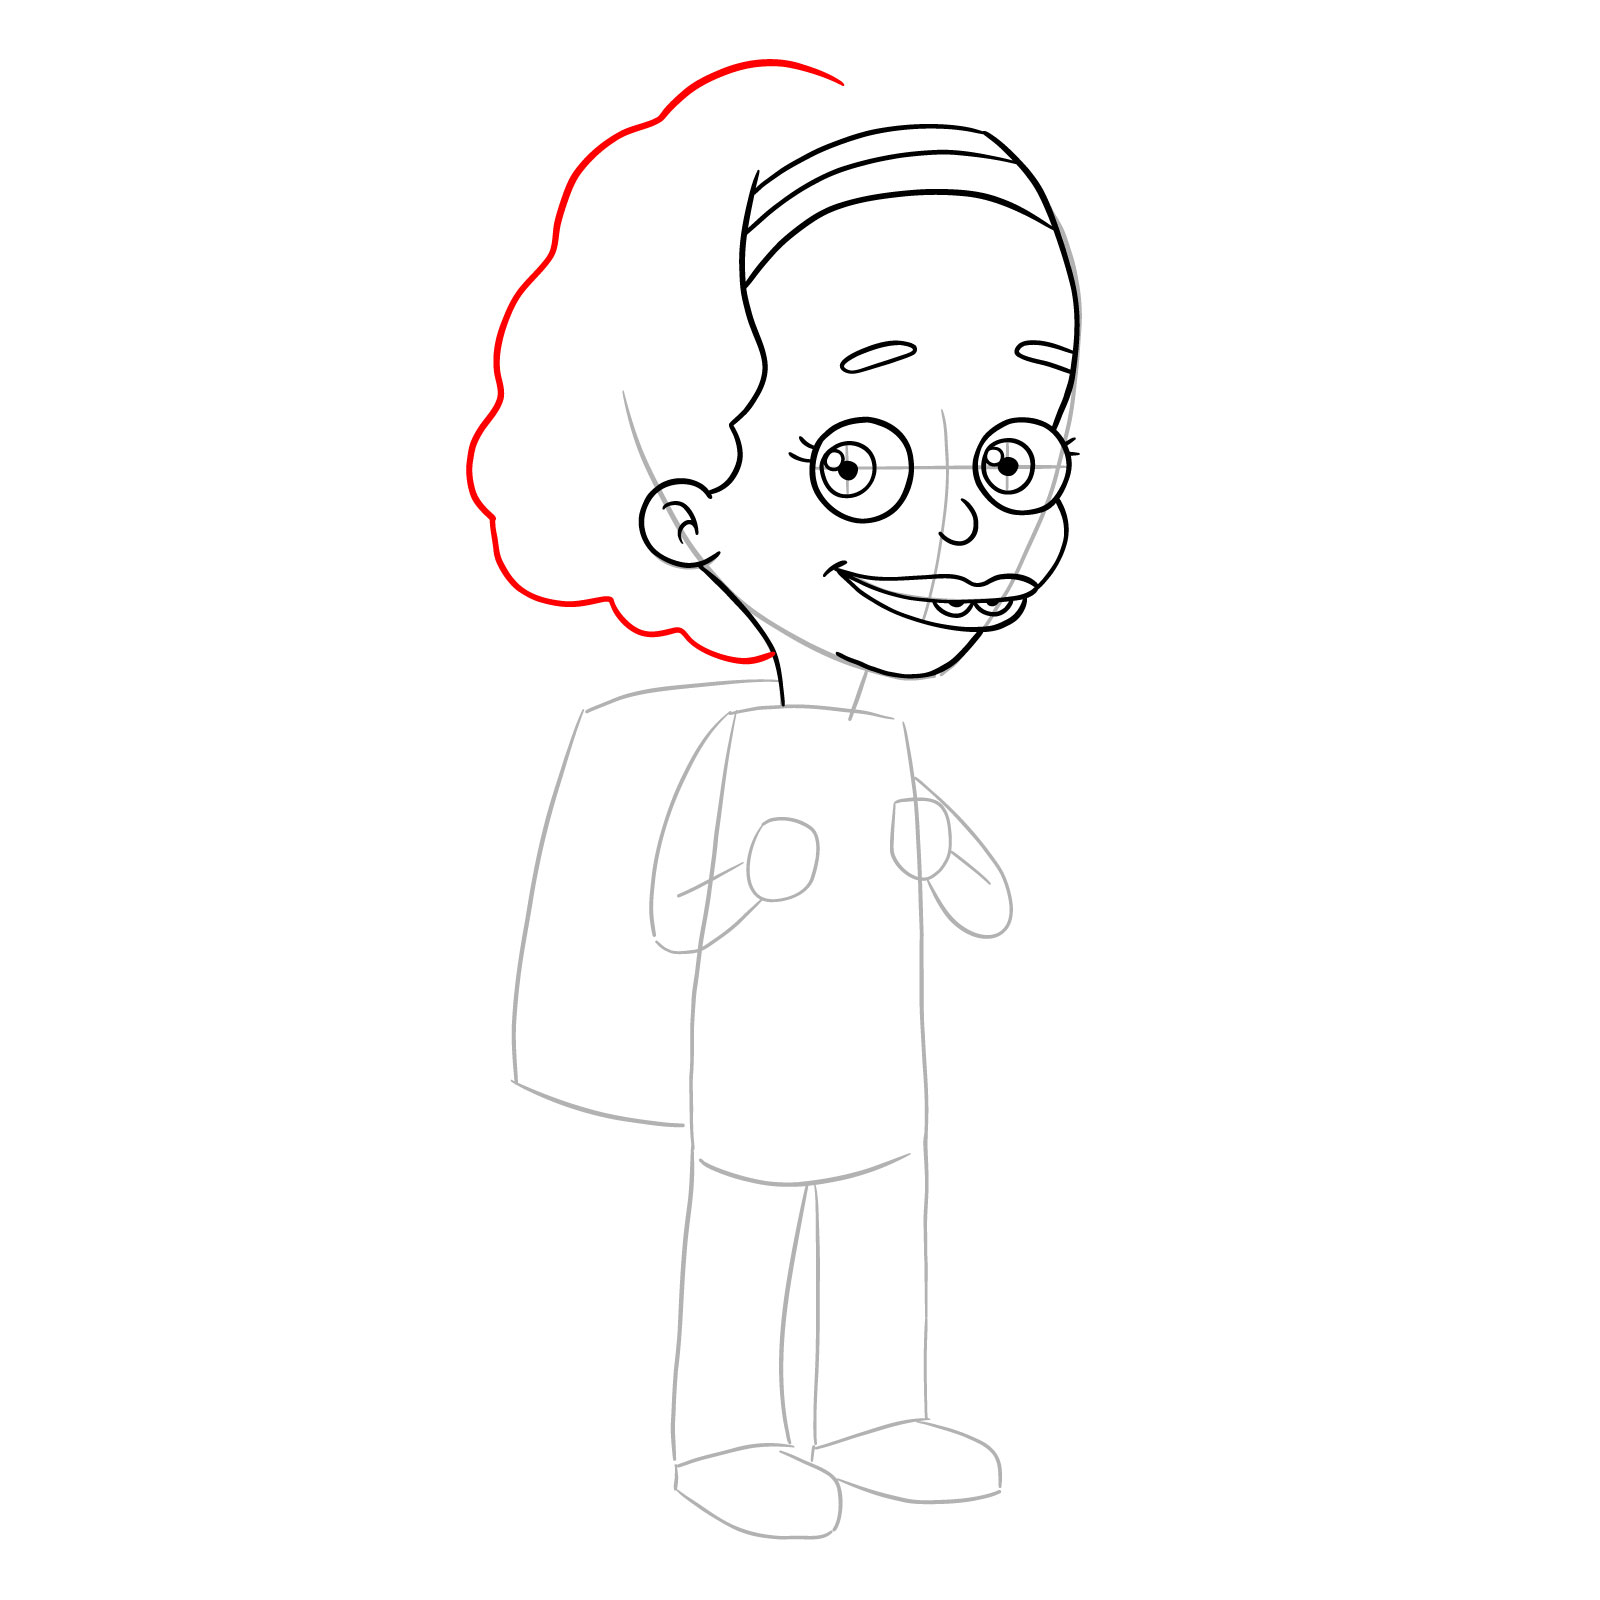 How to draw Missy from Big Mouth - step 11